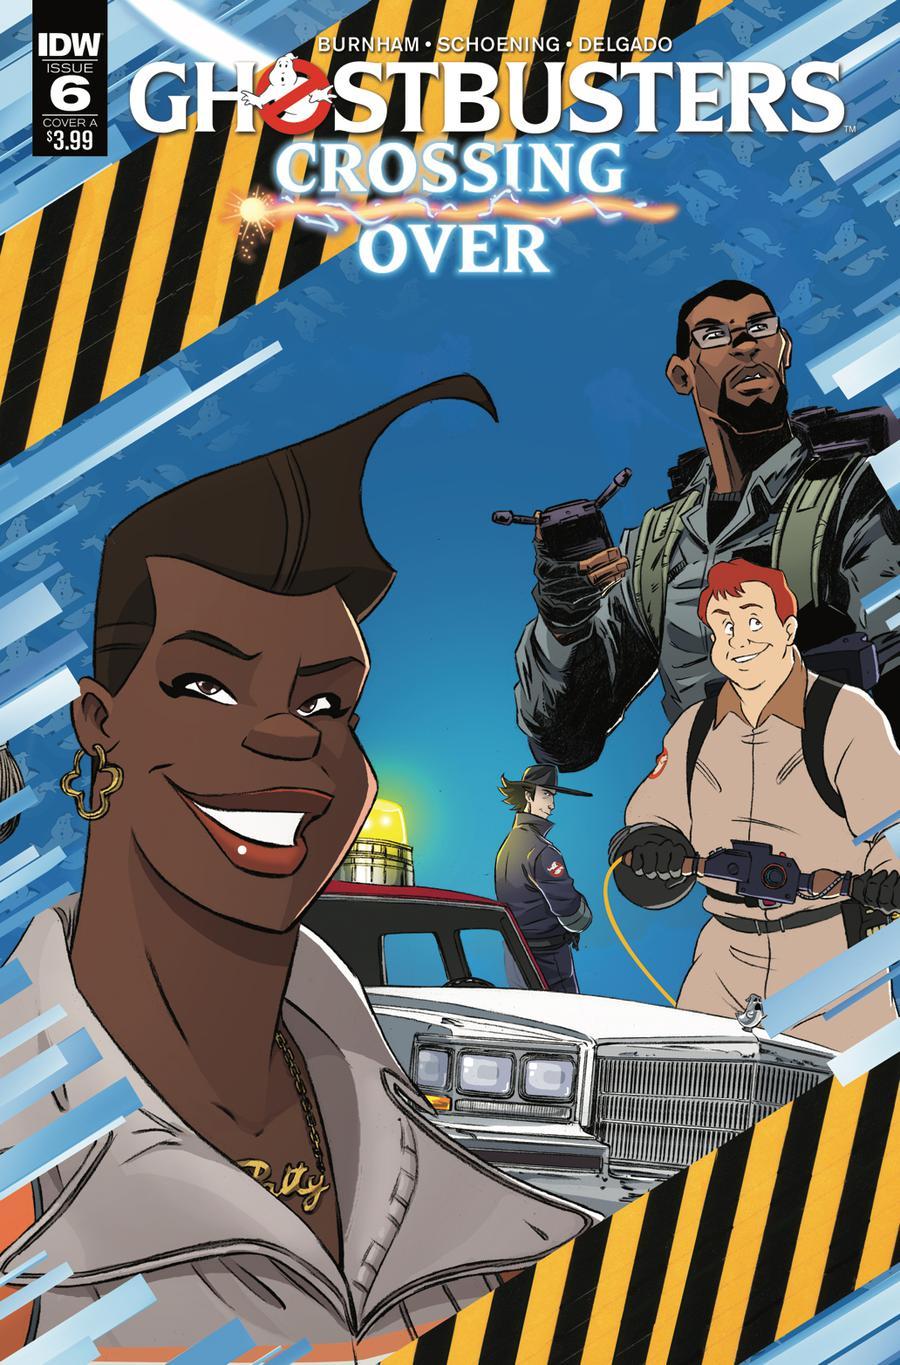 Ghostbusters Crossing Over Vol. 1 #6